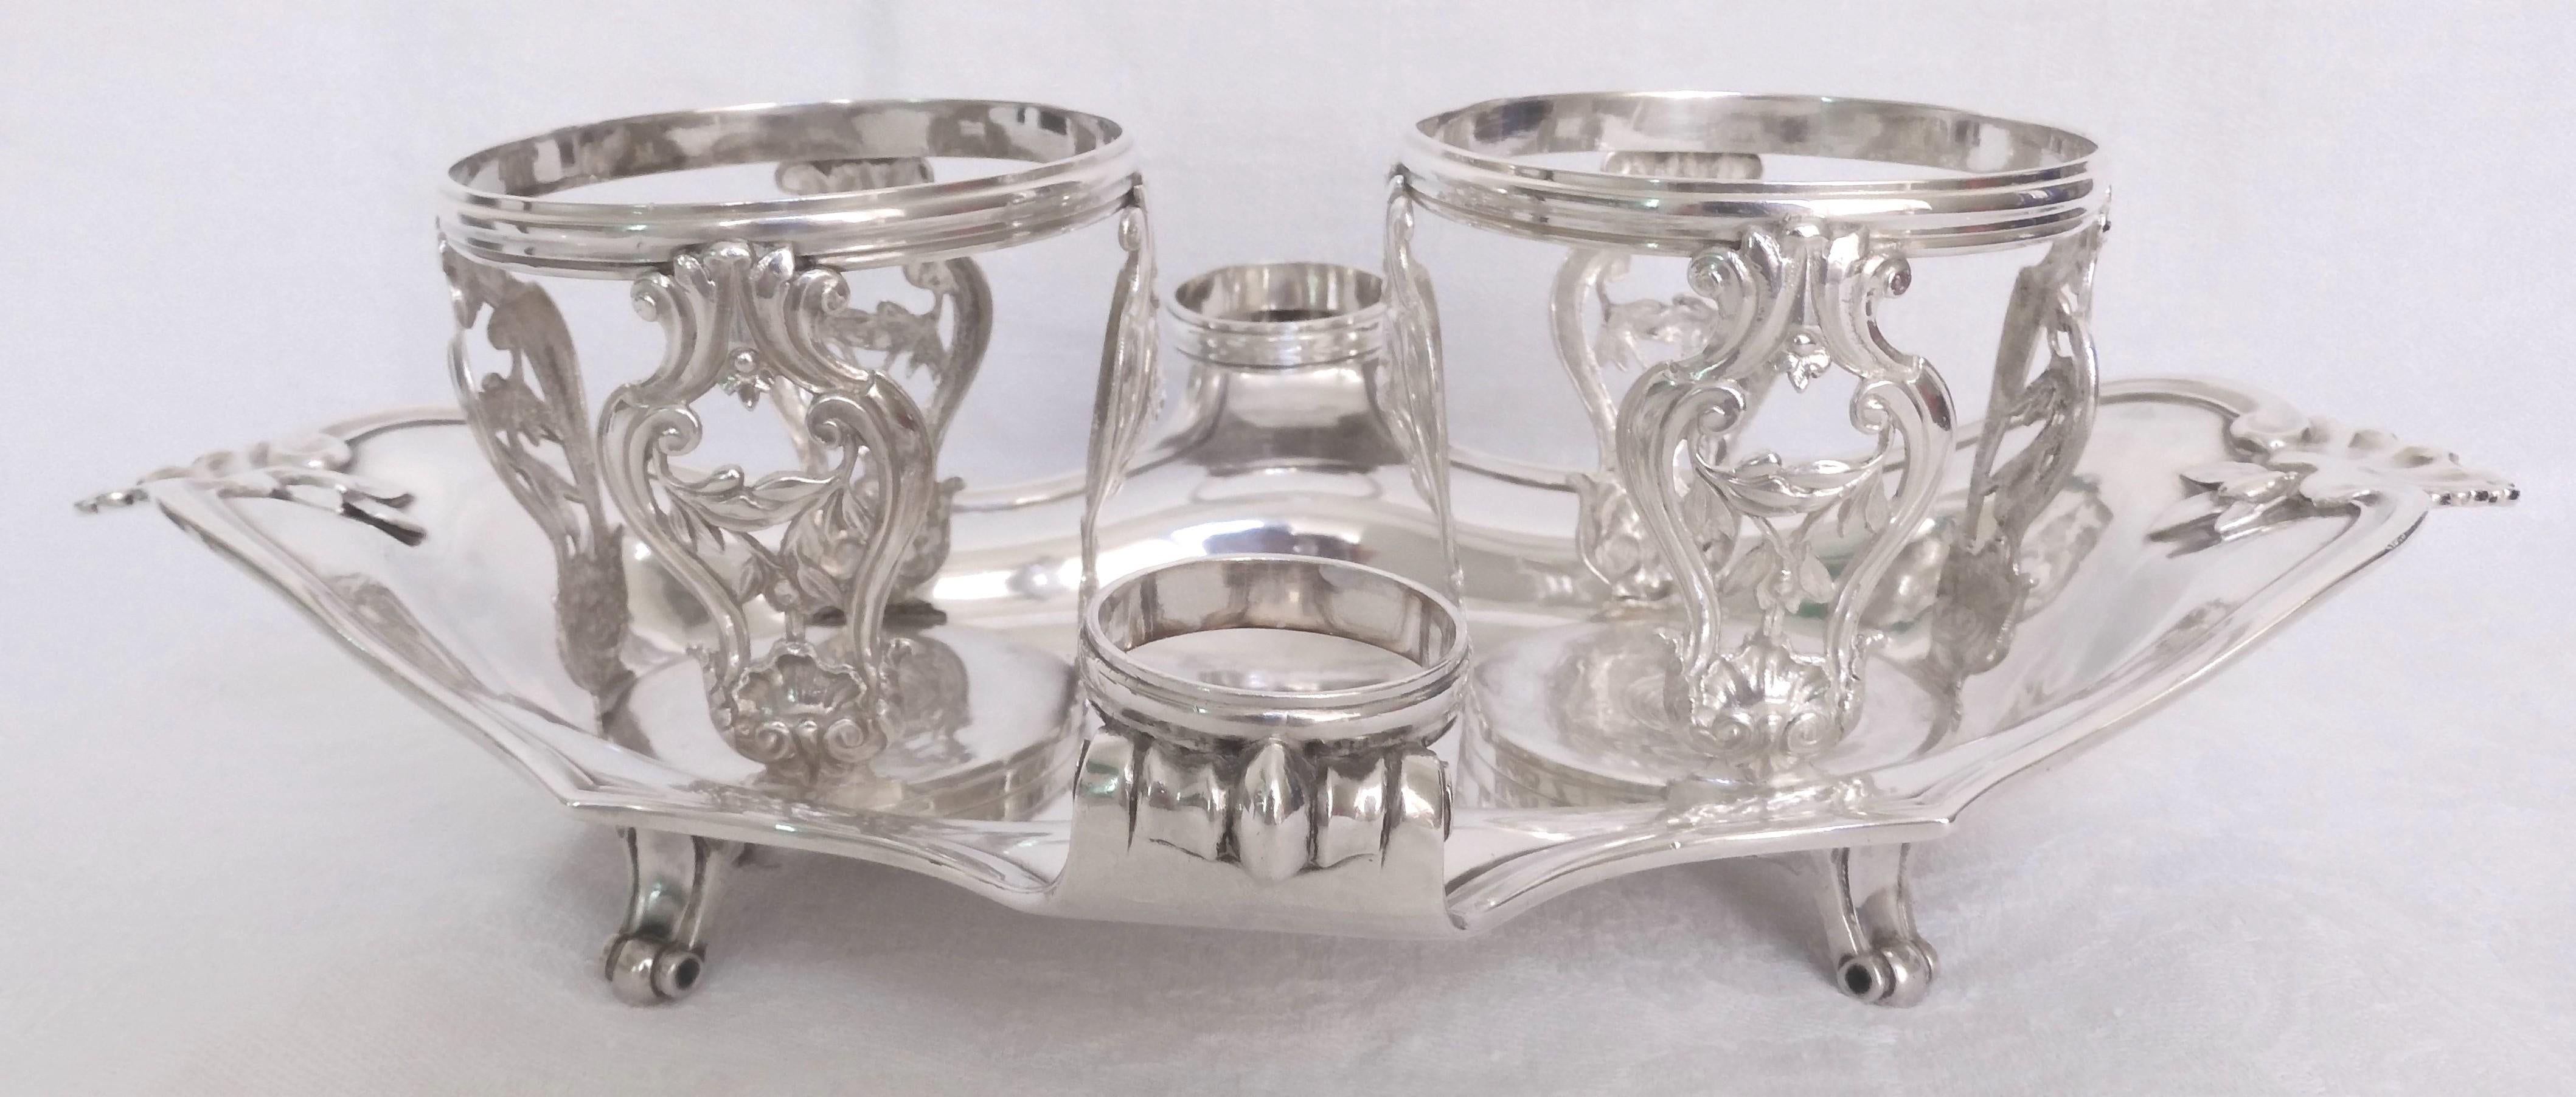 Late 18th Century Sterling Silver Oil and Vinegar Set, Louis XVI Period, France Paris 18th Century